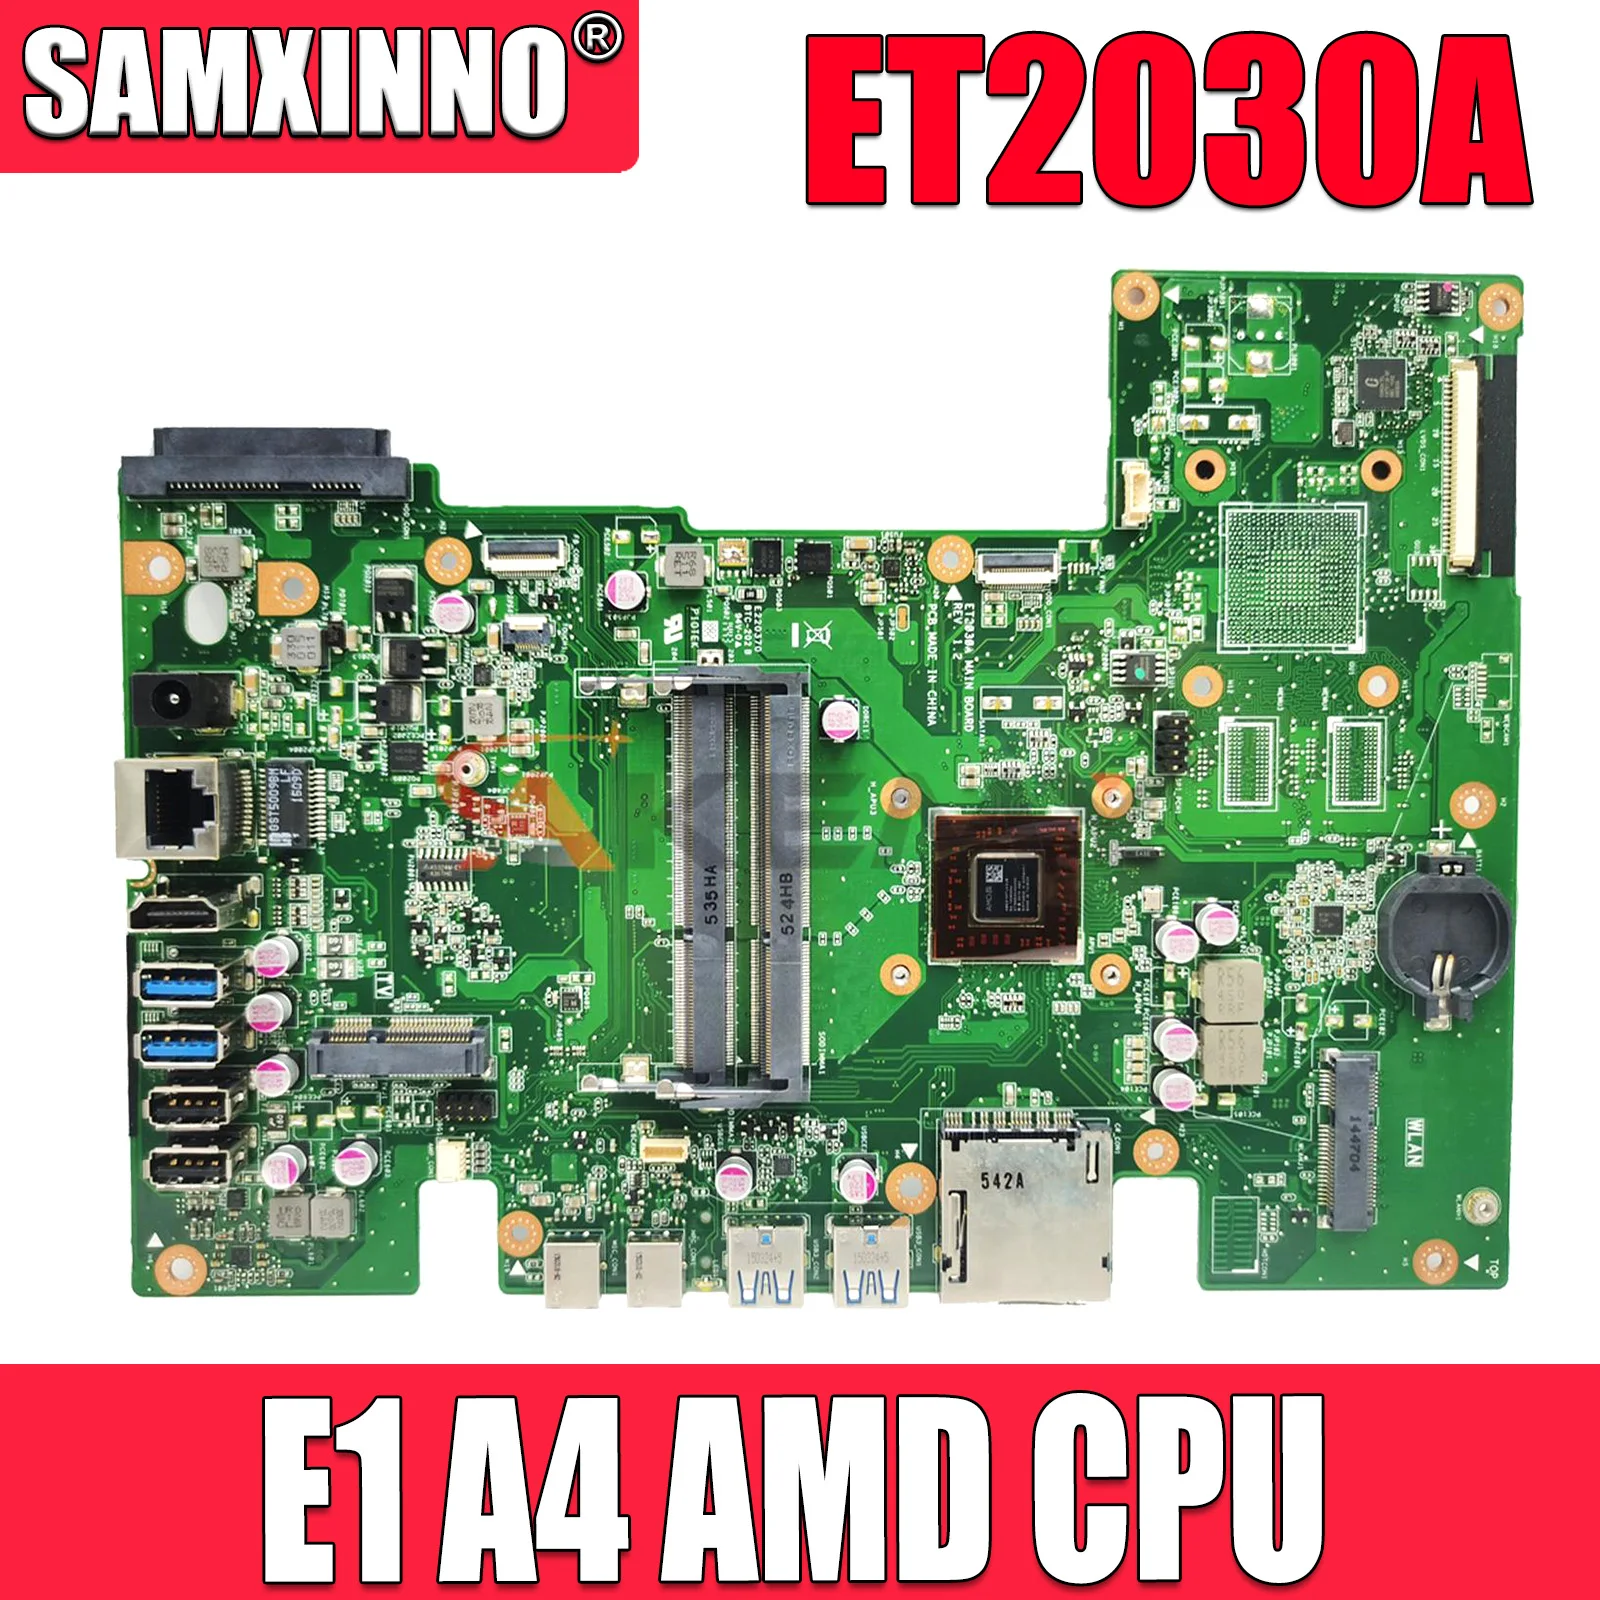 

ET2030A E1-6010 A4-6210 CPU Mainboard For ASUS ET2030A Motherboard 100% Tested Working Well Free Shipping